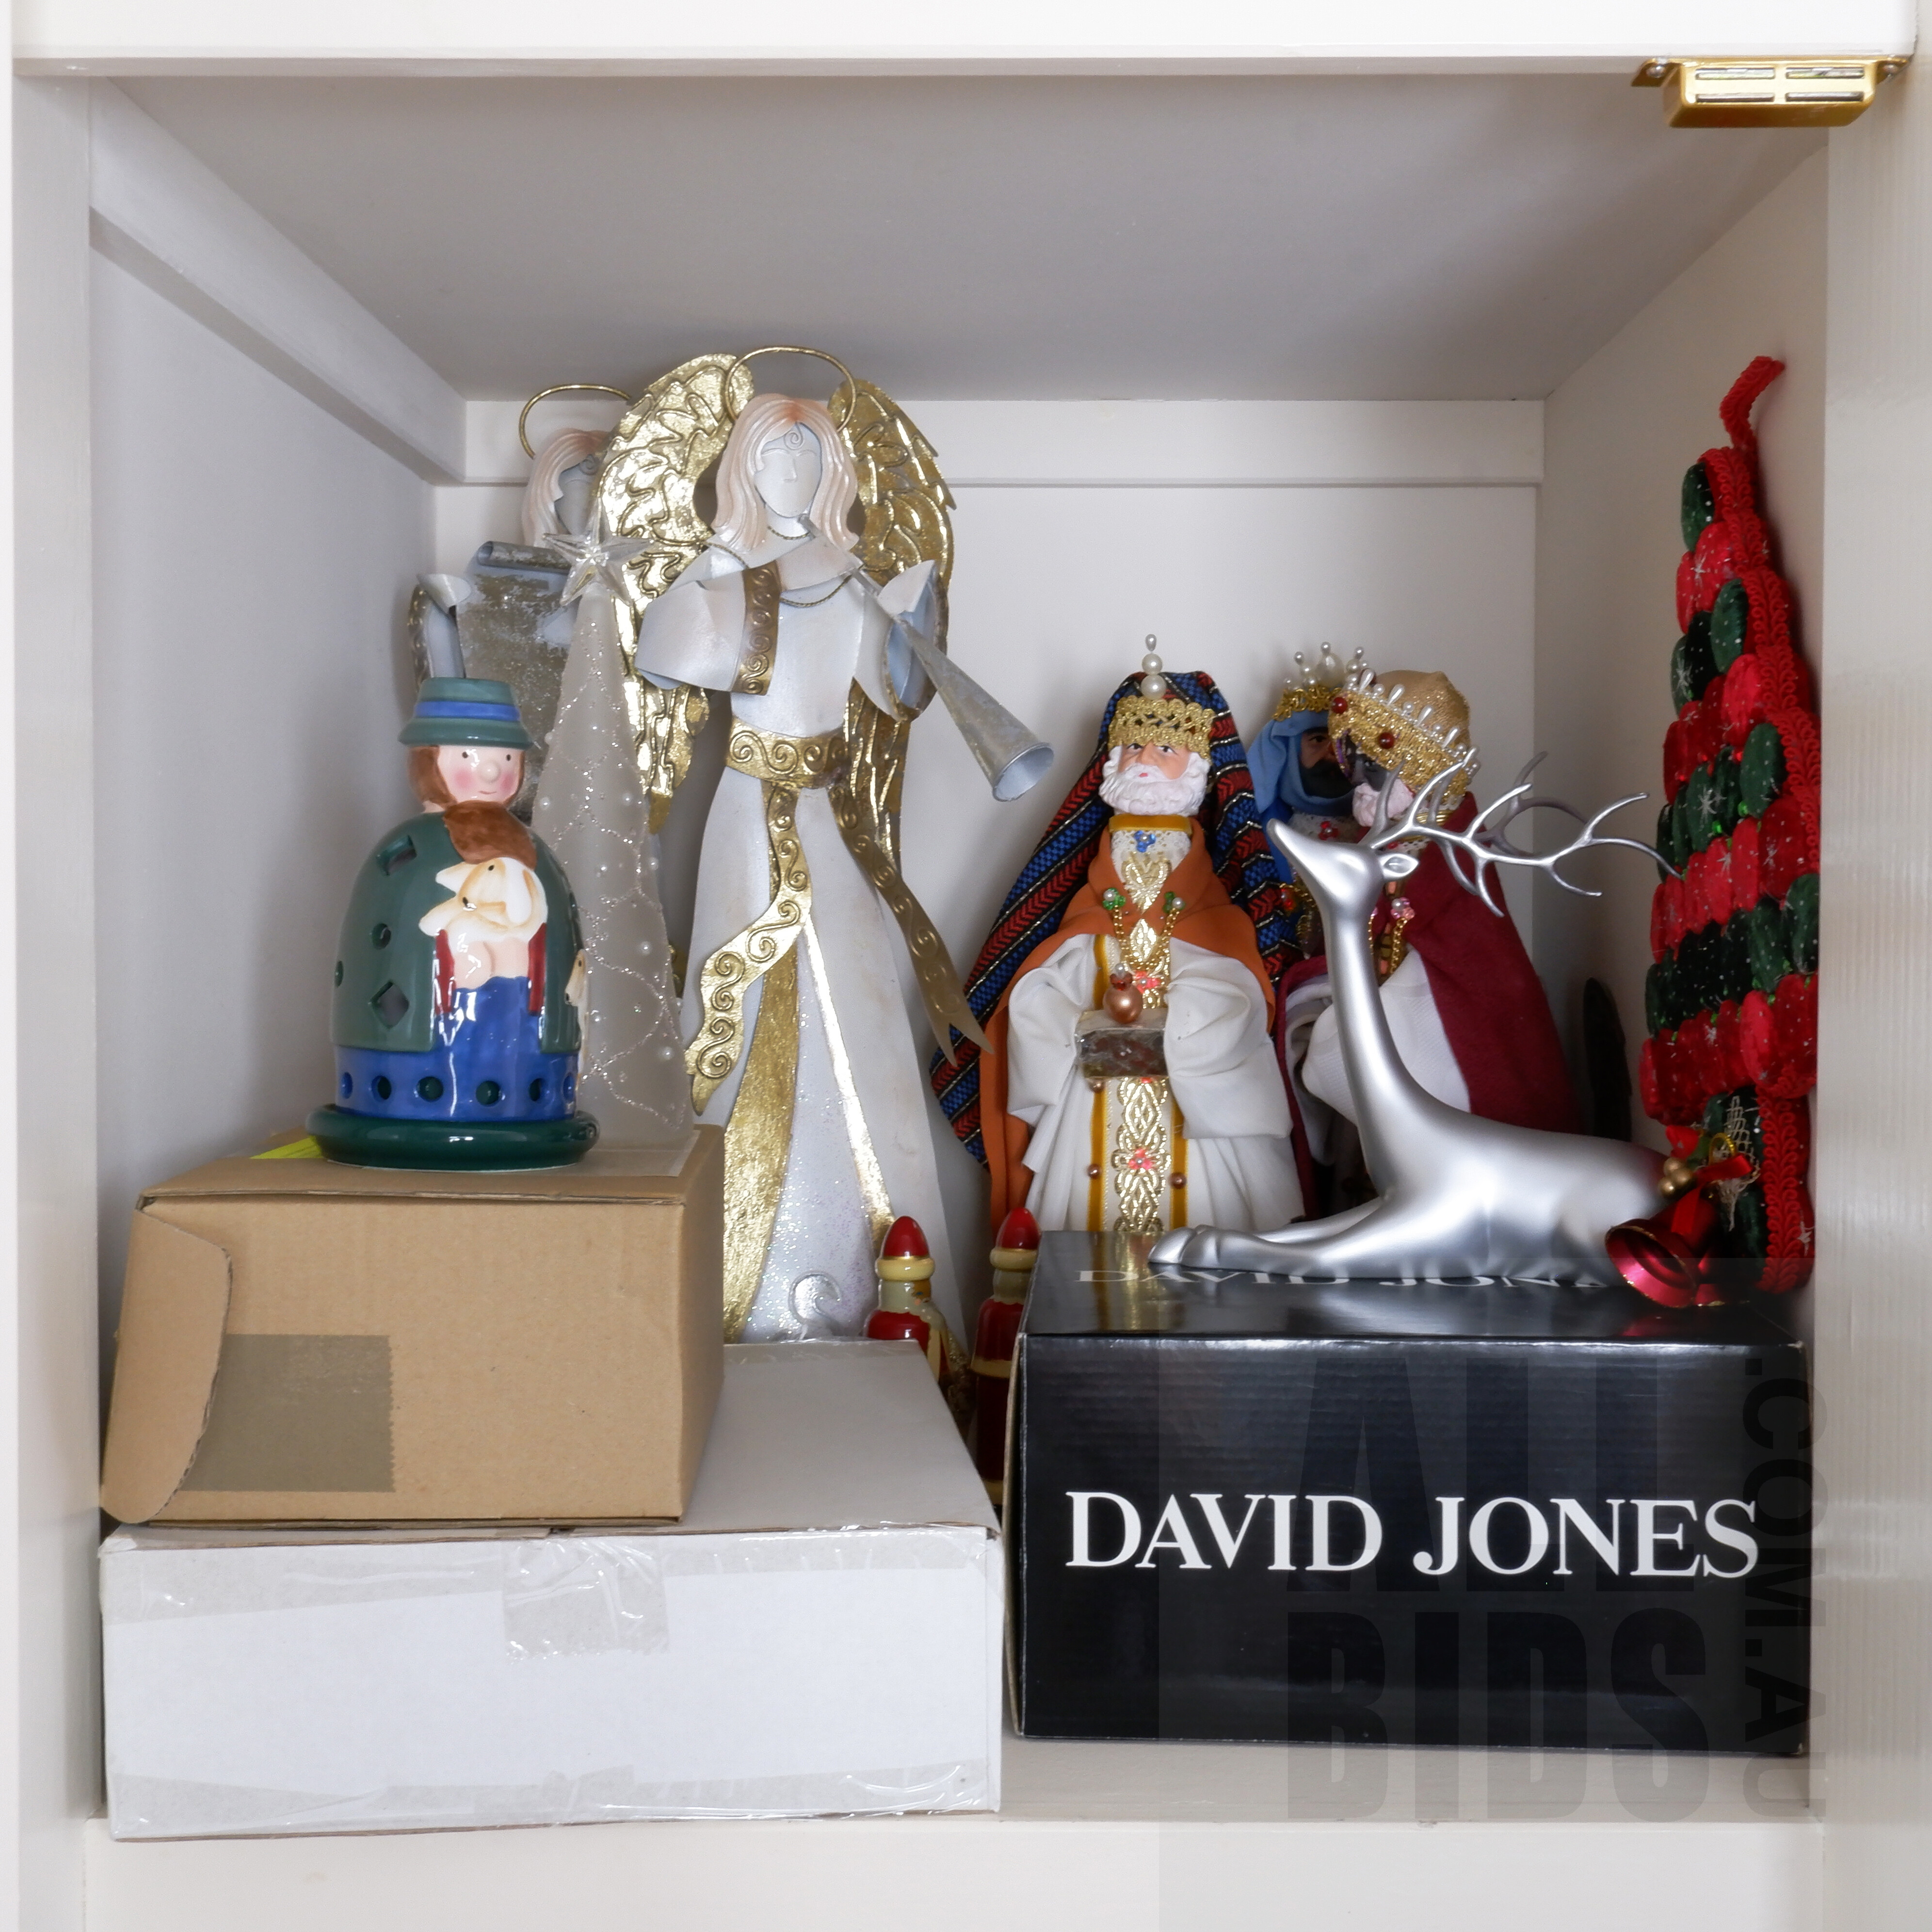 'Collection of Christmas Decorations, Including Three Wise Men Figures, David Jones Deer and More'